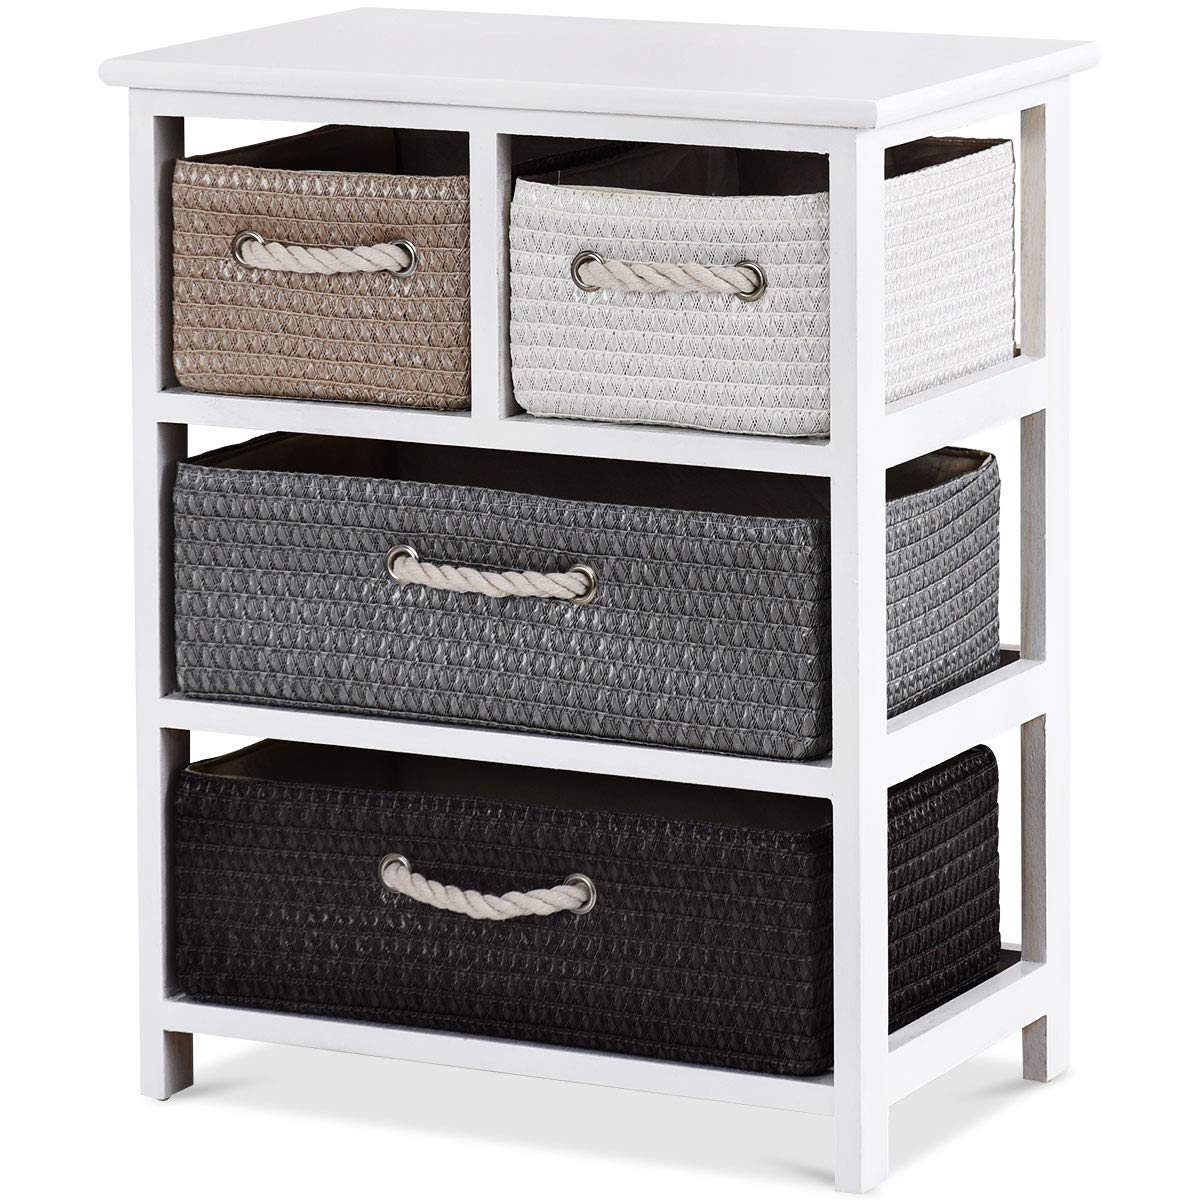 Giantex Nightstands Wooden End Table W/Knitted Drawers Bedside Table Storage Organizer